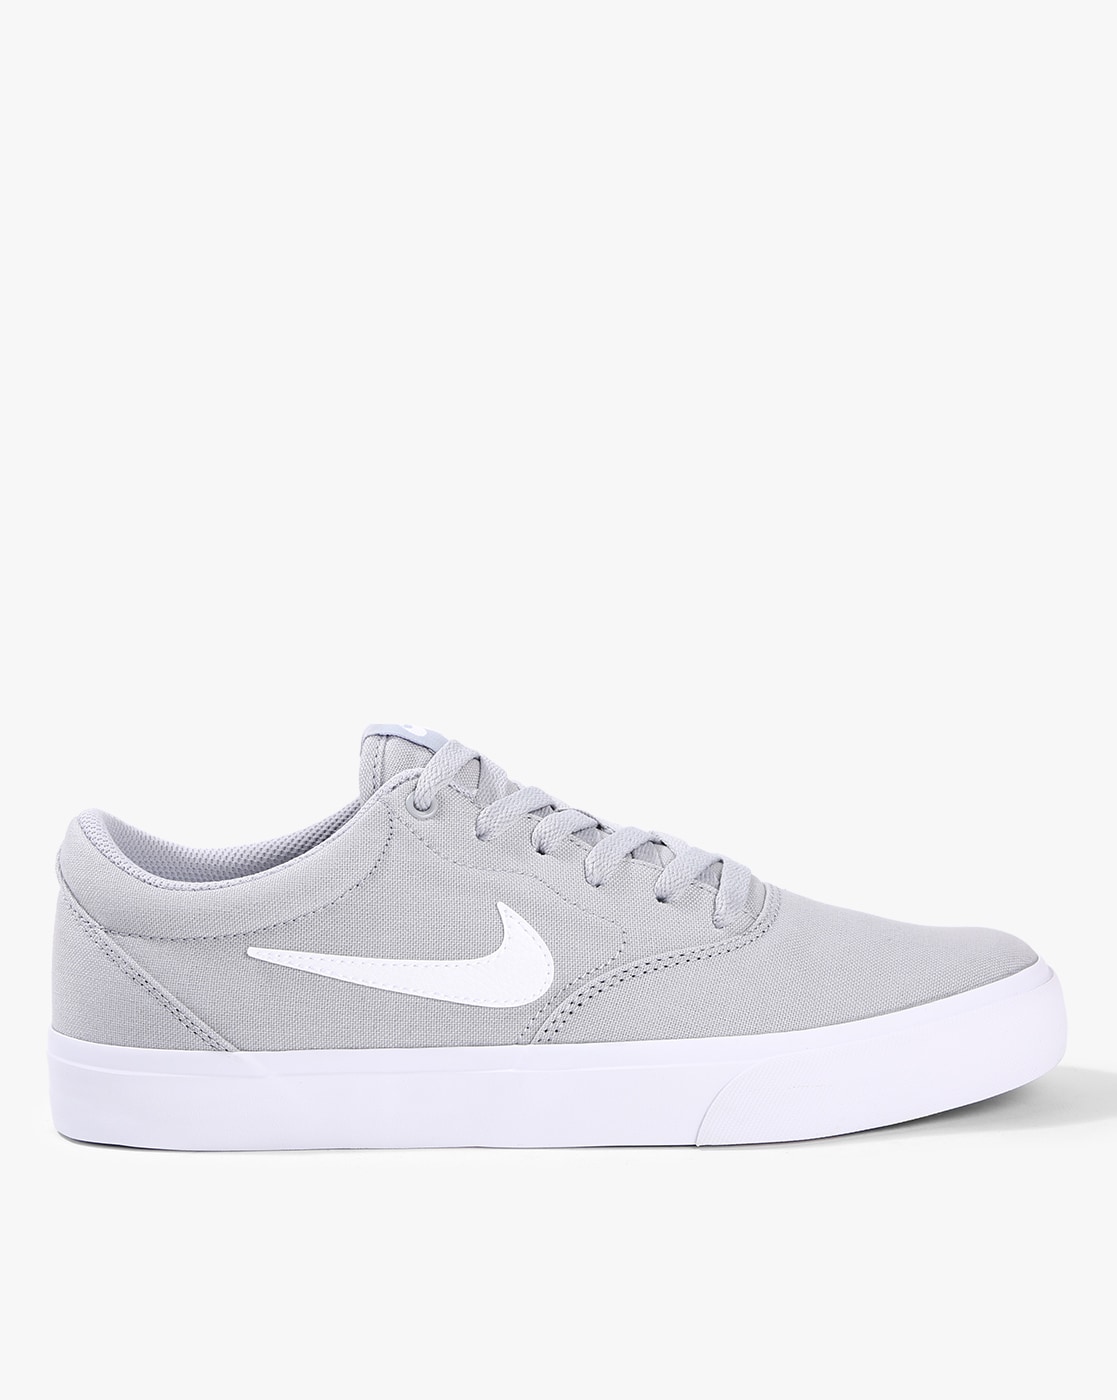 grey nike low top shoes